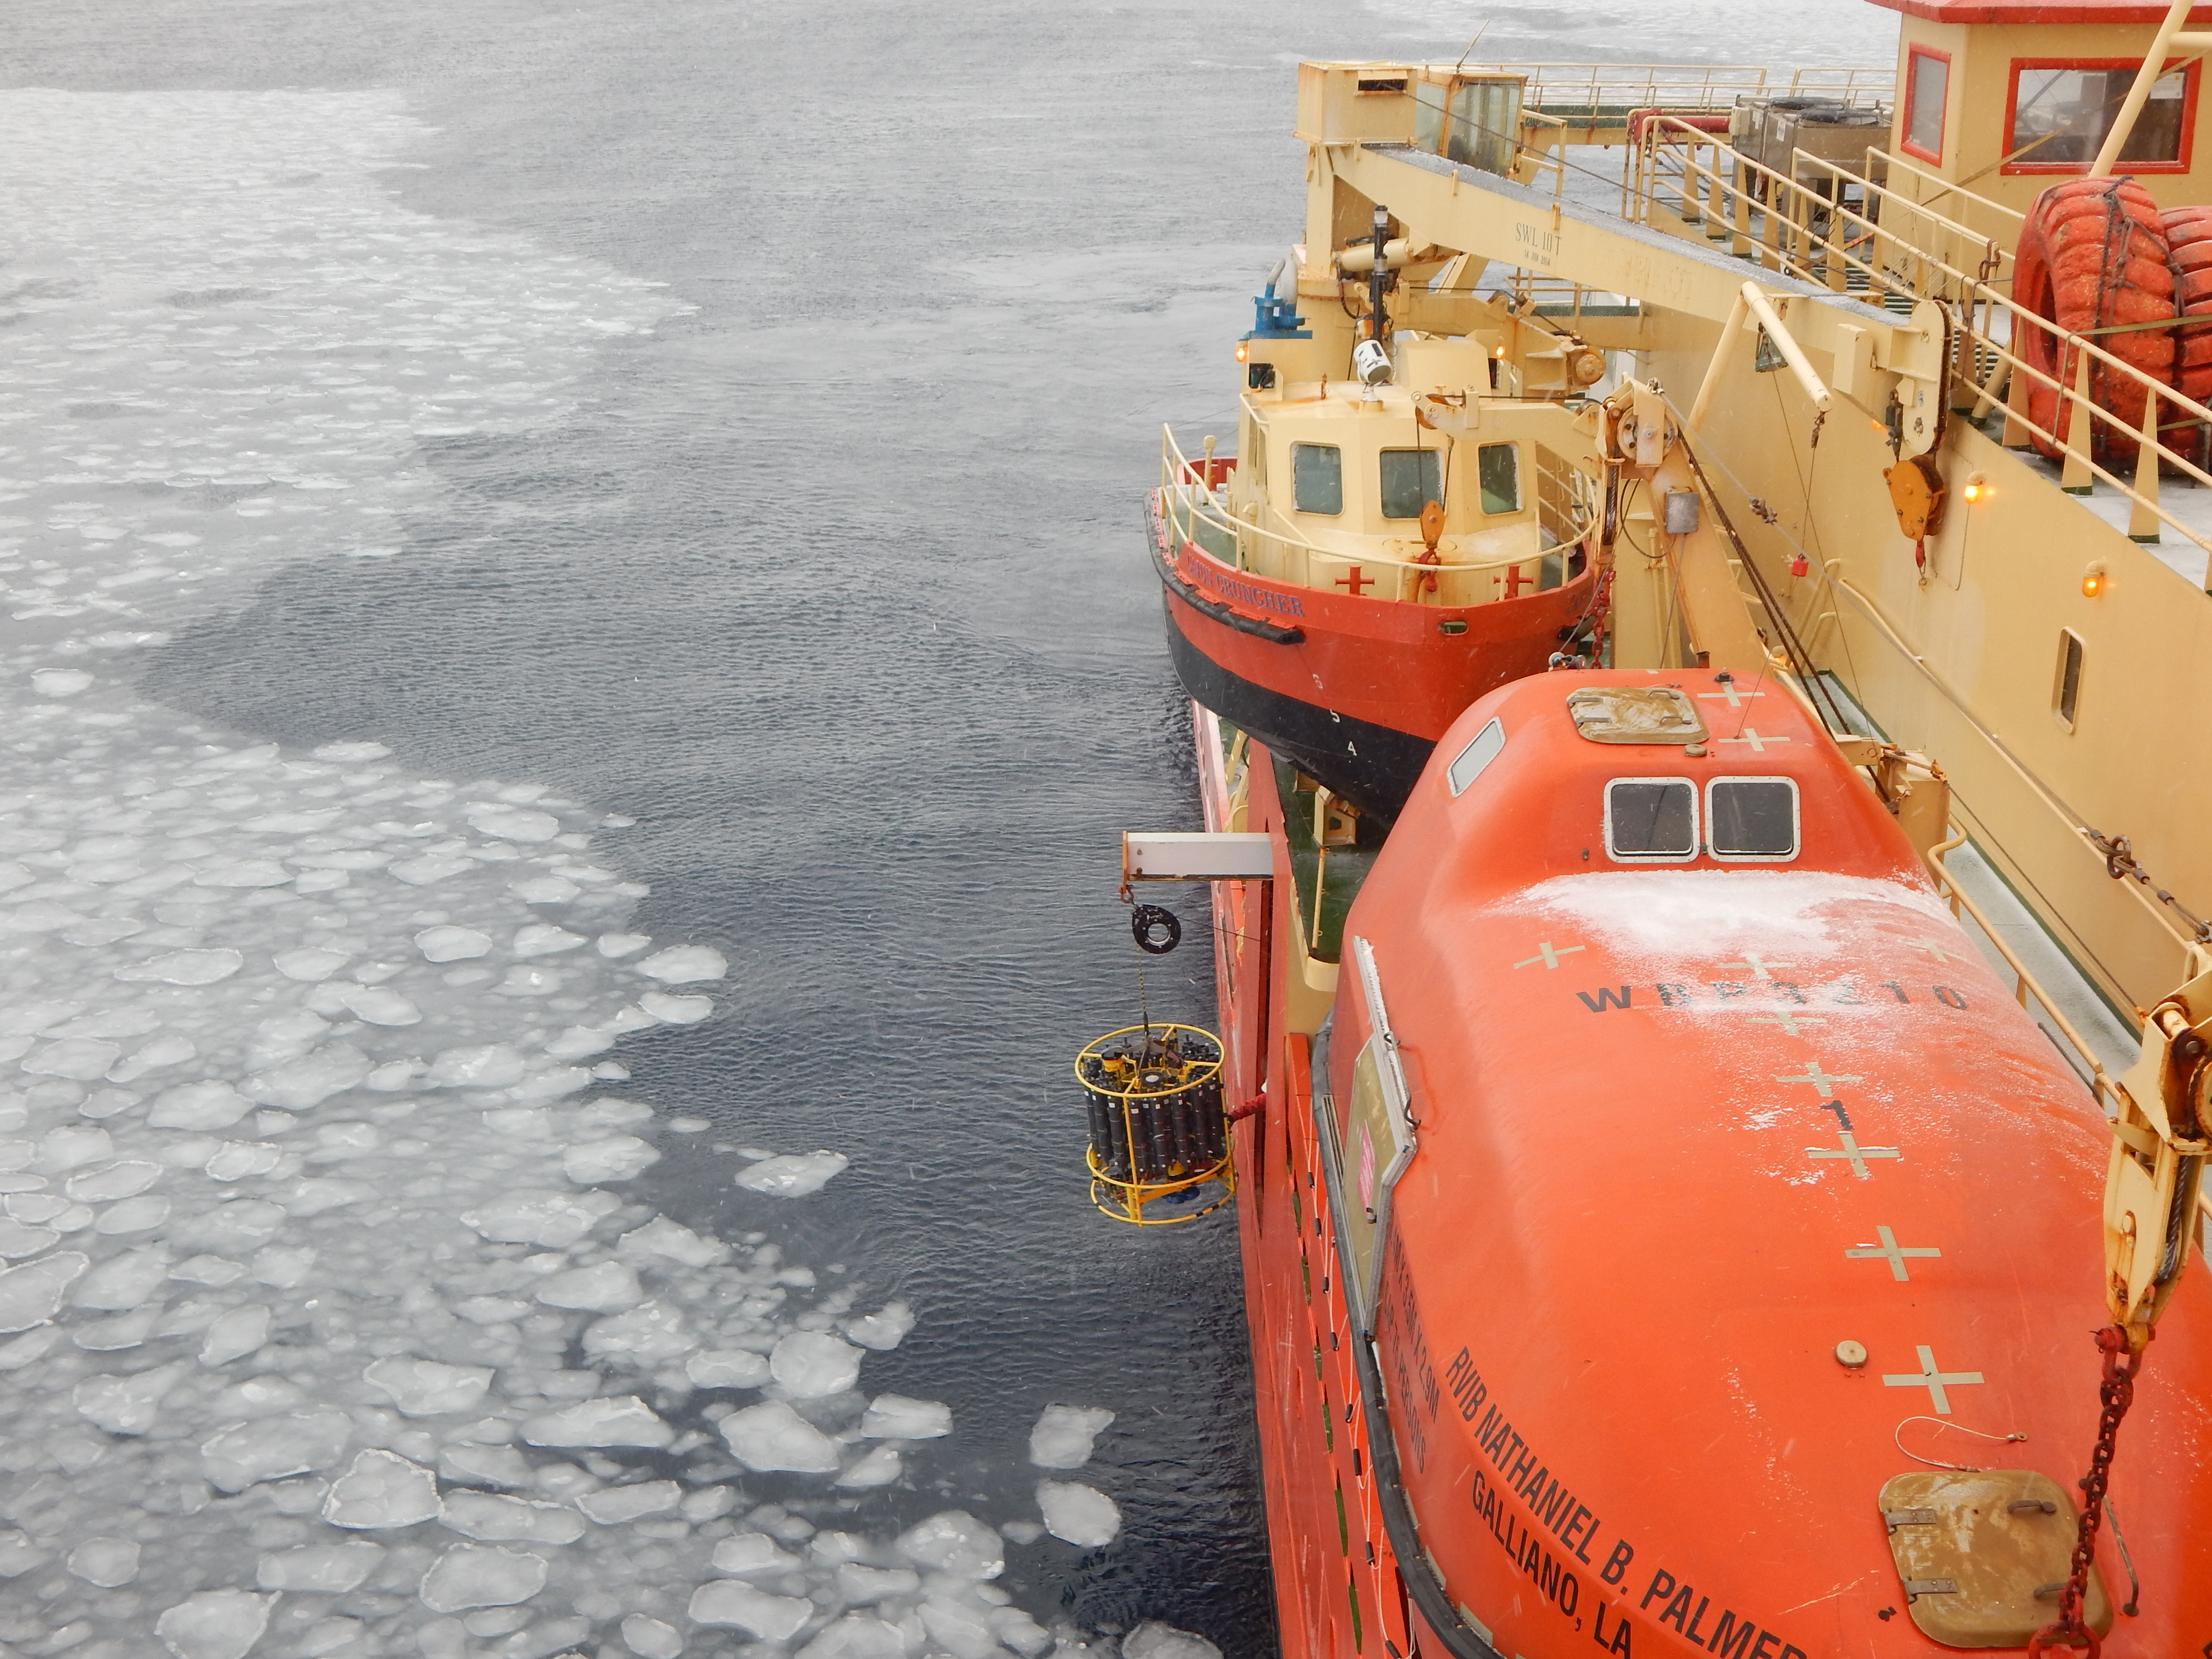 An instrument is lowered over the side of a ship into icy water.